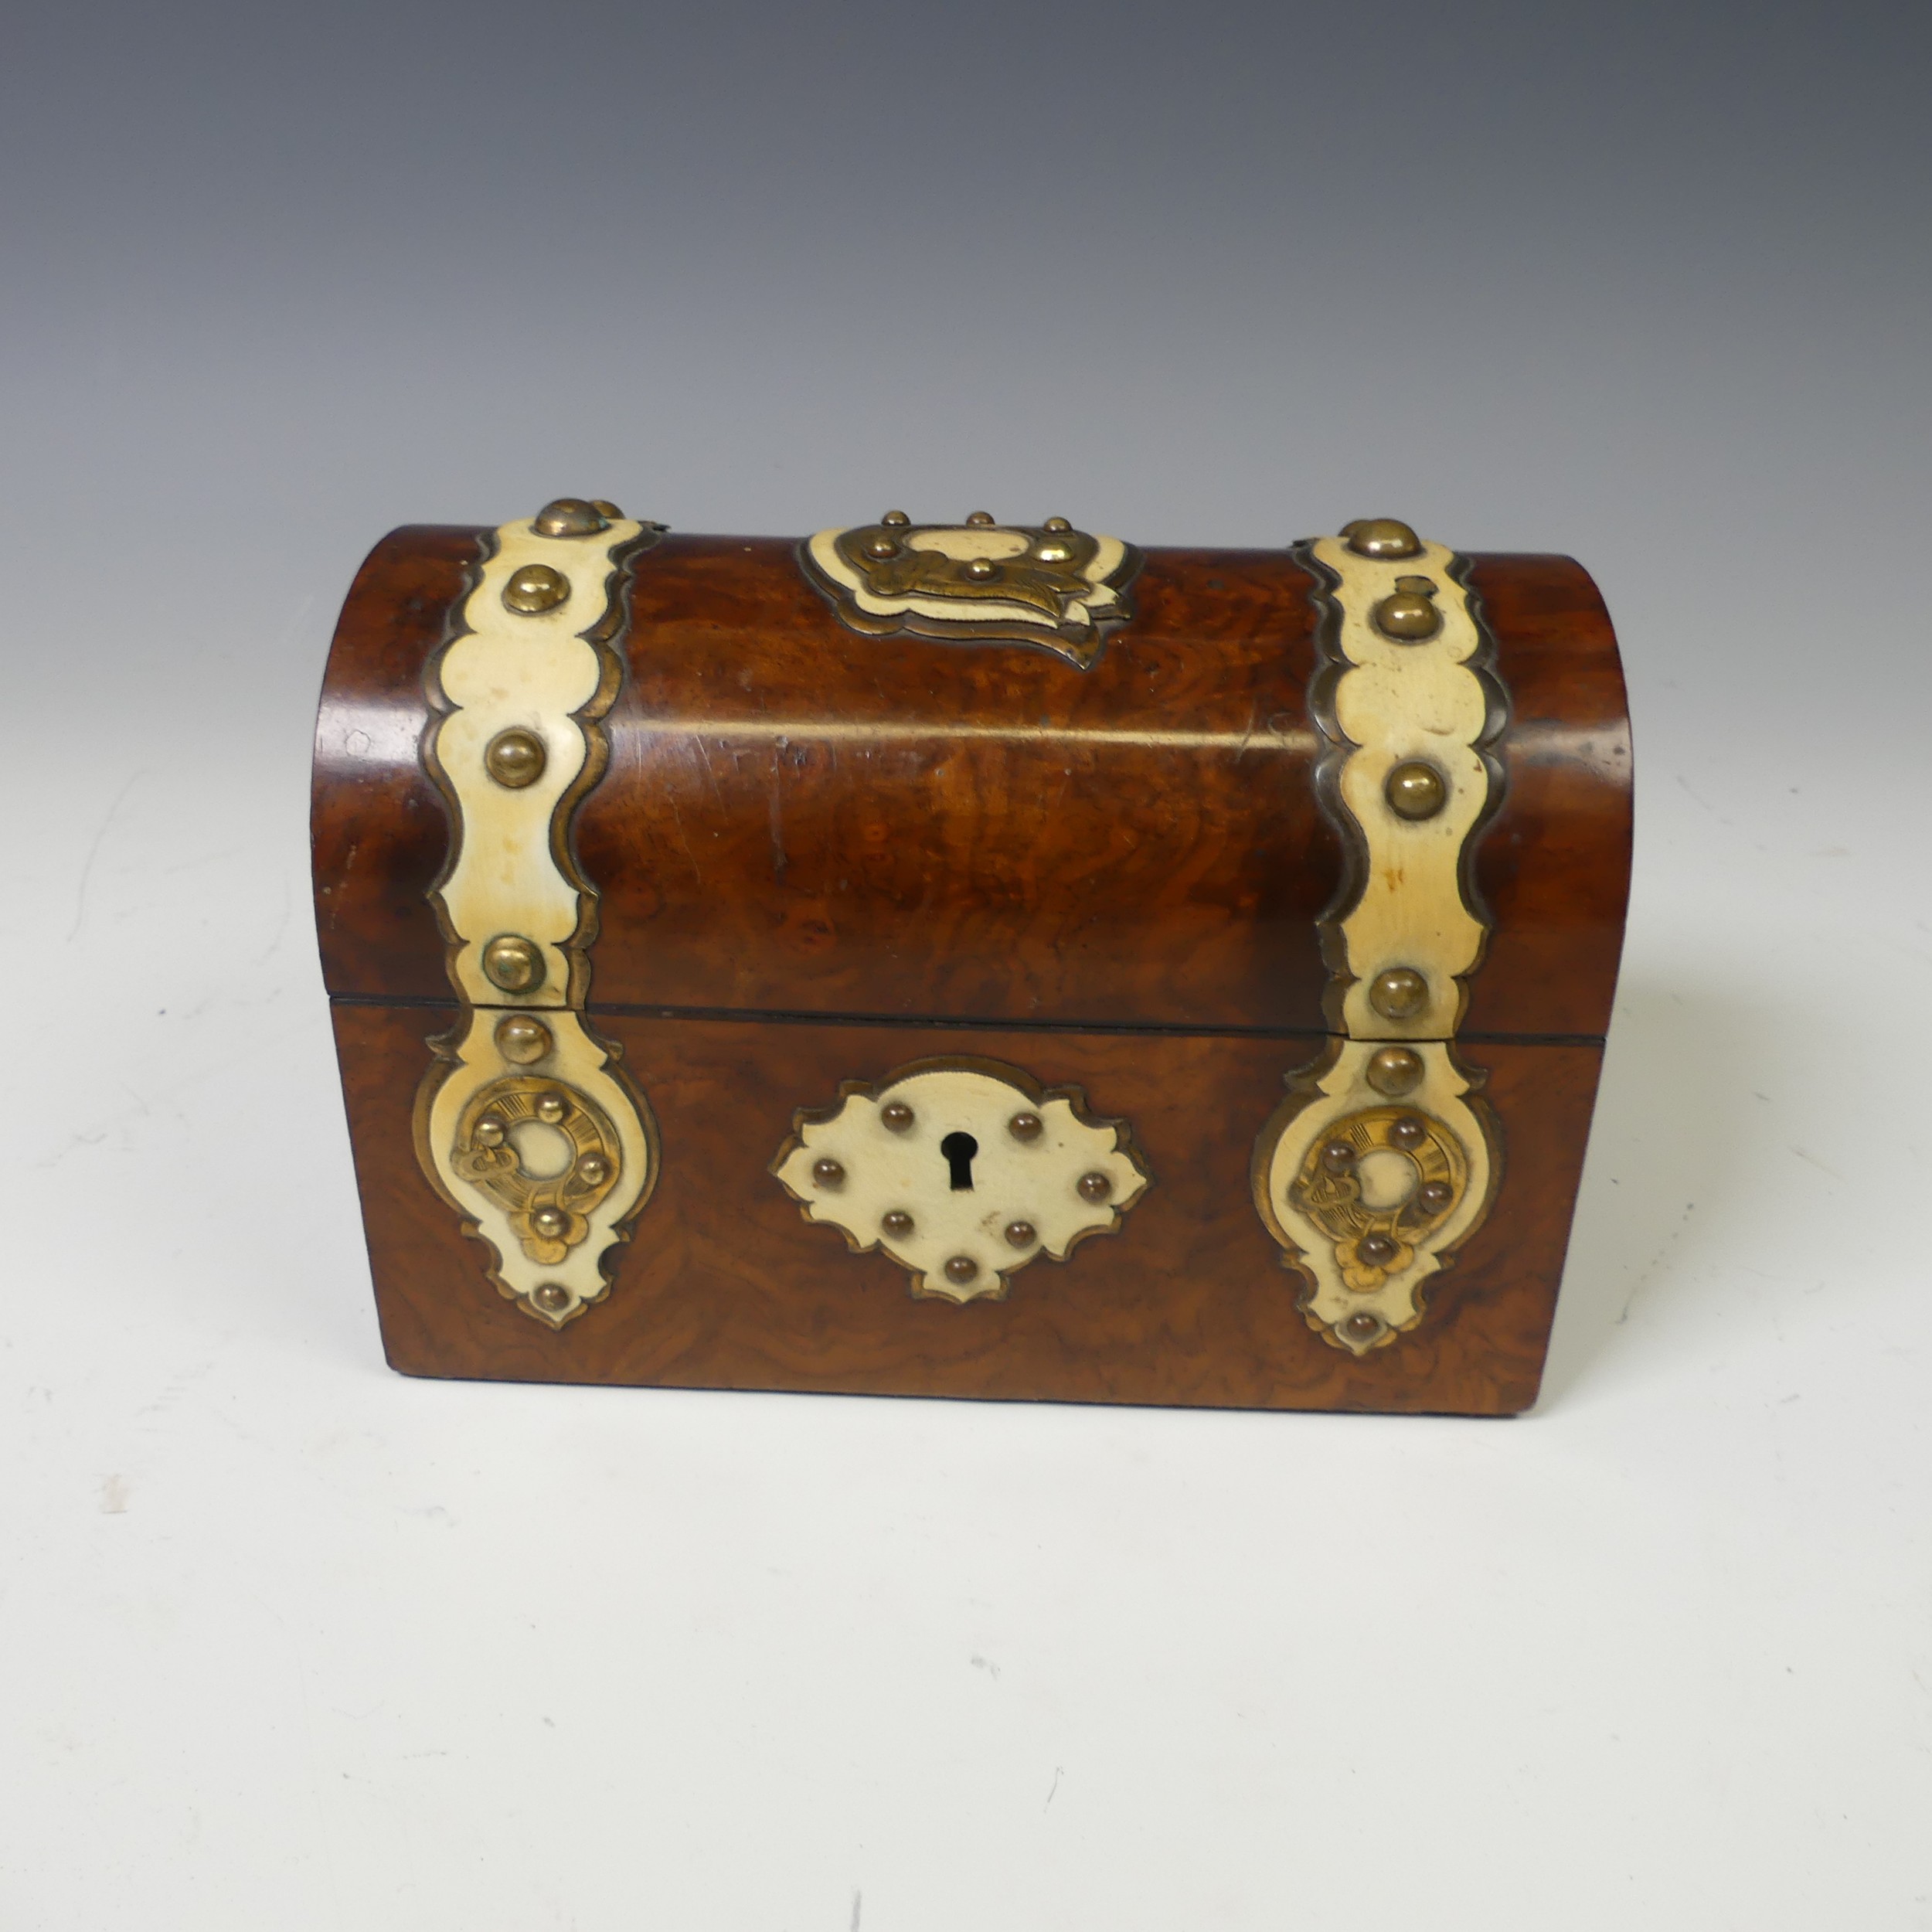 A Victorian figured walnut dome top Stationary Box, with fitted inside, W 16.5 cm x H 11 cm x D 8.